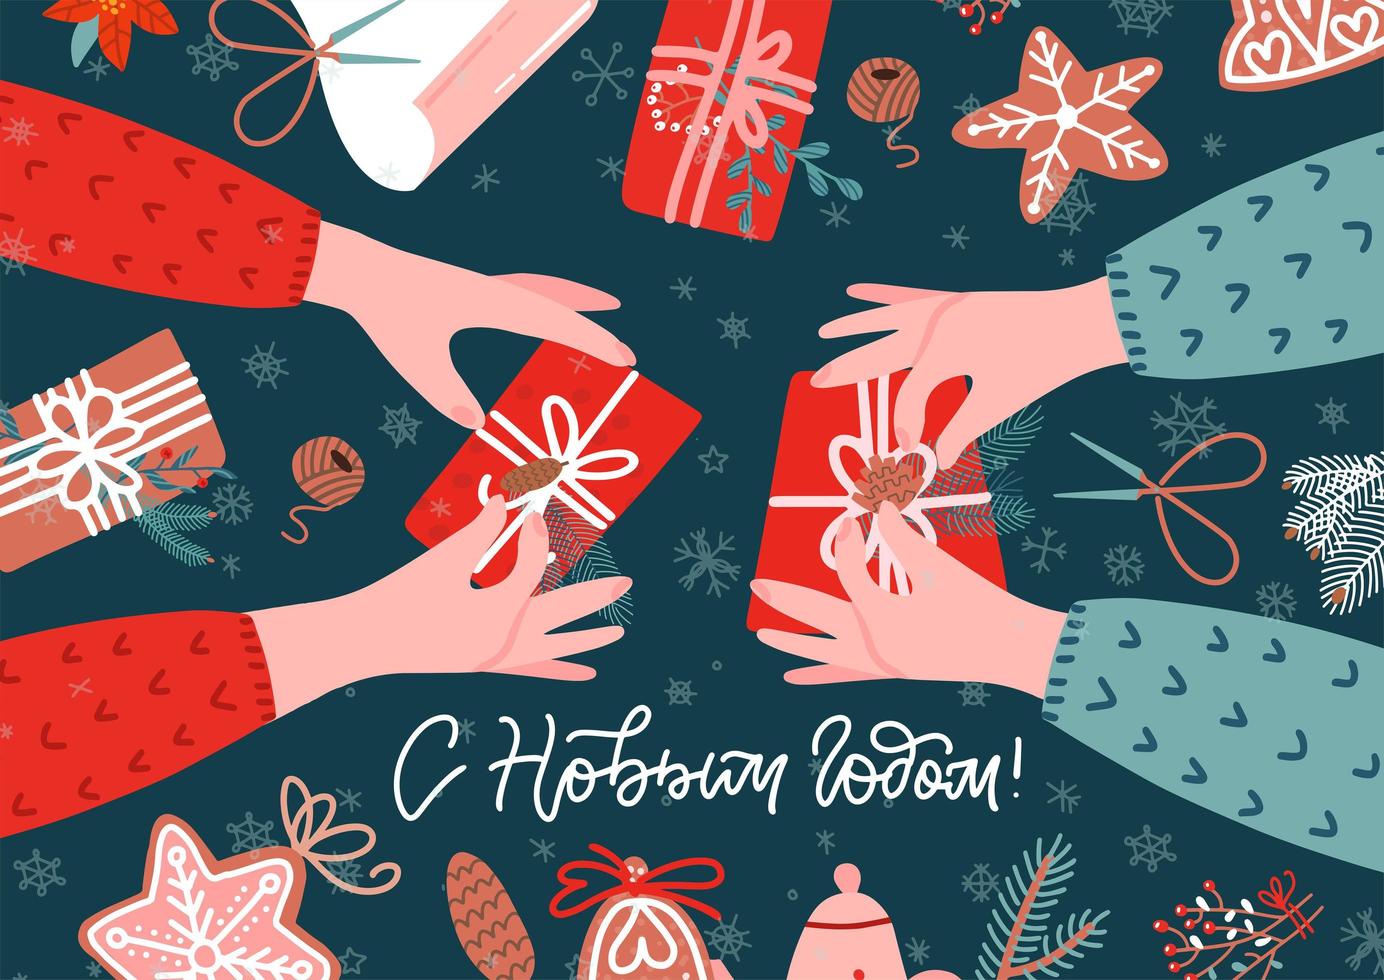 Two pairs of Hands and gift box on table. Wrapping christmas gift box. Preparing for celebration new year. Top view table with scissors , tree branches. Russian lettering translation - Happy new year vector